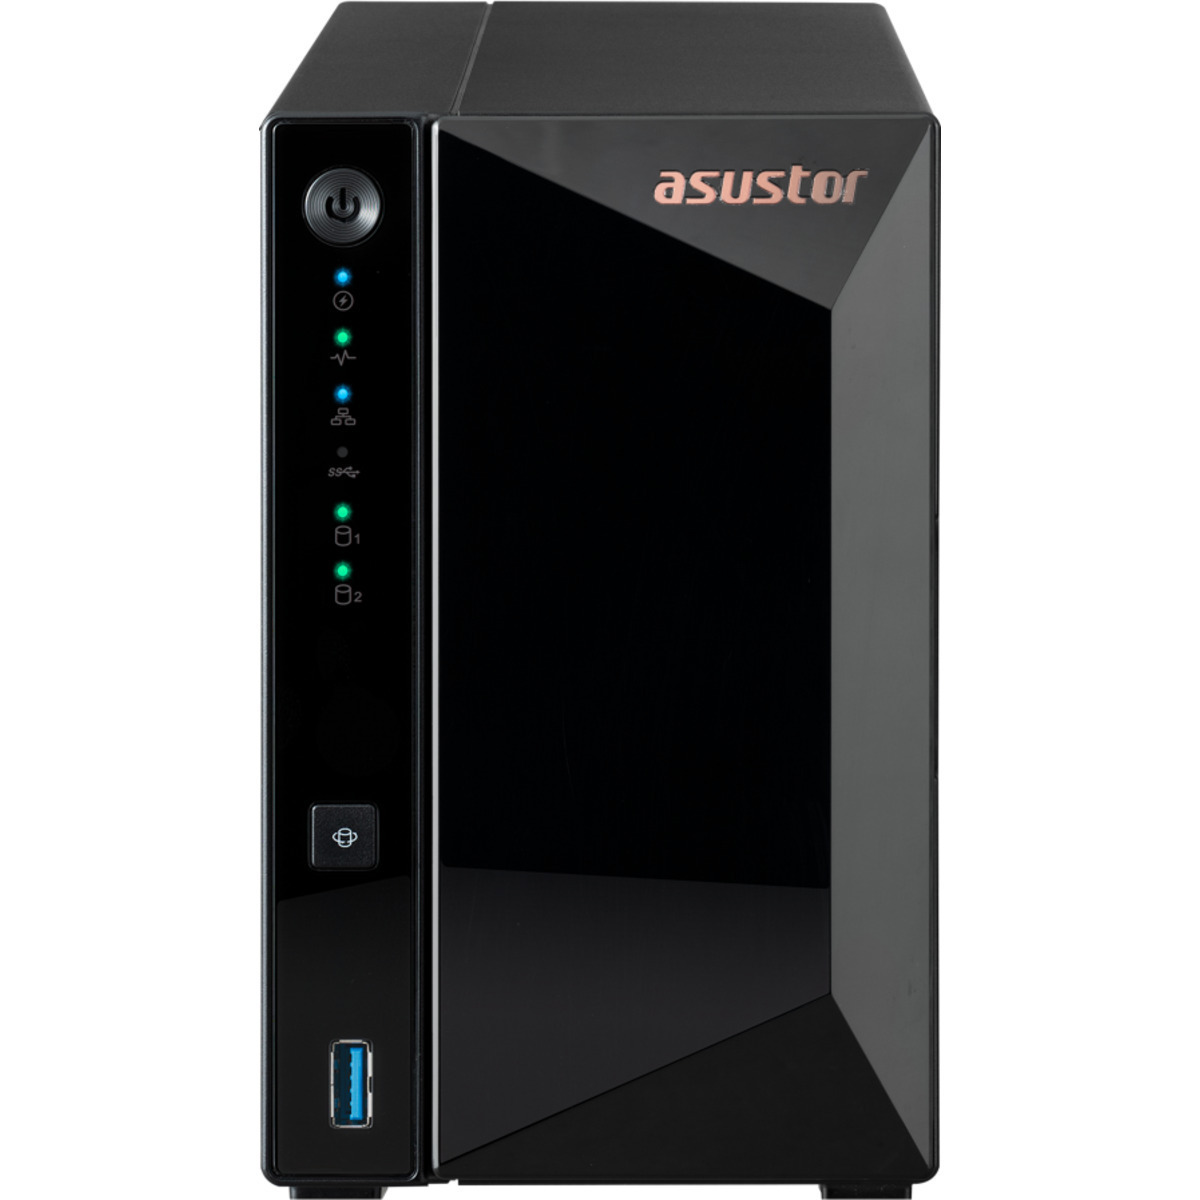 ASUSTOR DRIVESTOR 2 Pro AS3302T 8tb 2-Bay Desktop Personal / Basic Home / Small Office NAS - Network Attached Storage Device 2x4tb Western Digital Blue WD40EZRZ 3.5 5400rpm SATA 6Gb/s HDD CONSUMER Class Drives Installed - Burn-In Tested - ON SALE DRIVESTOR 2 Pro AS3302T